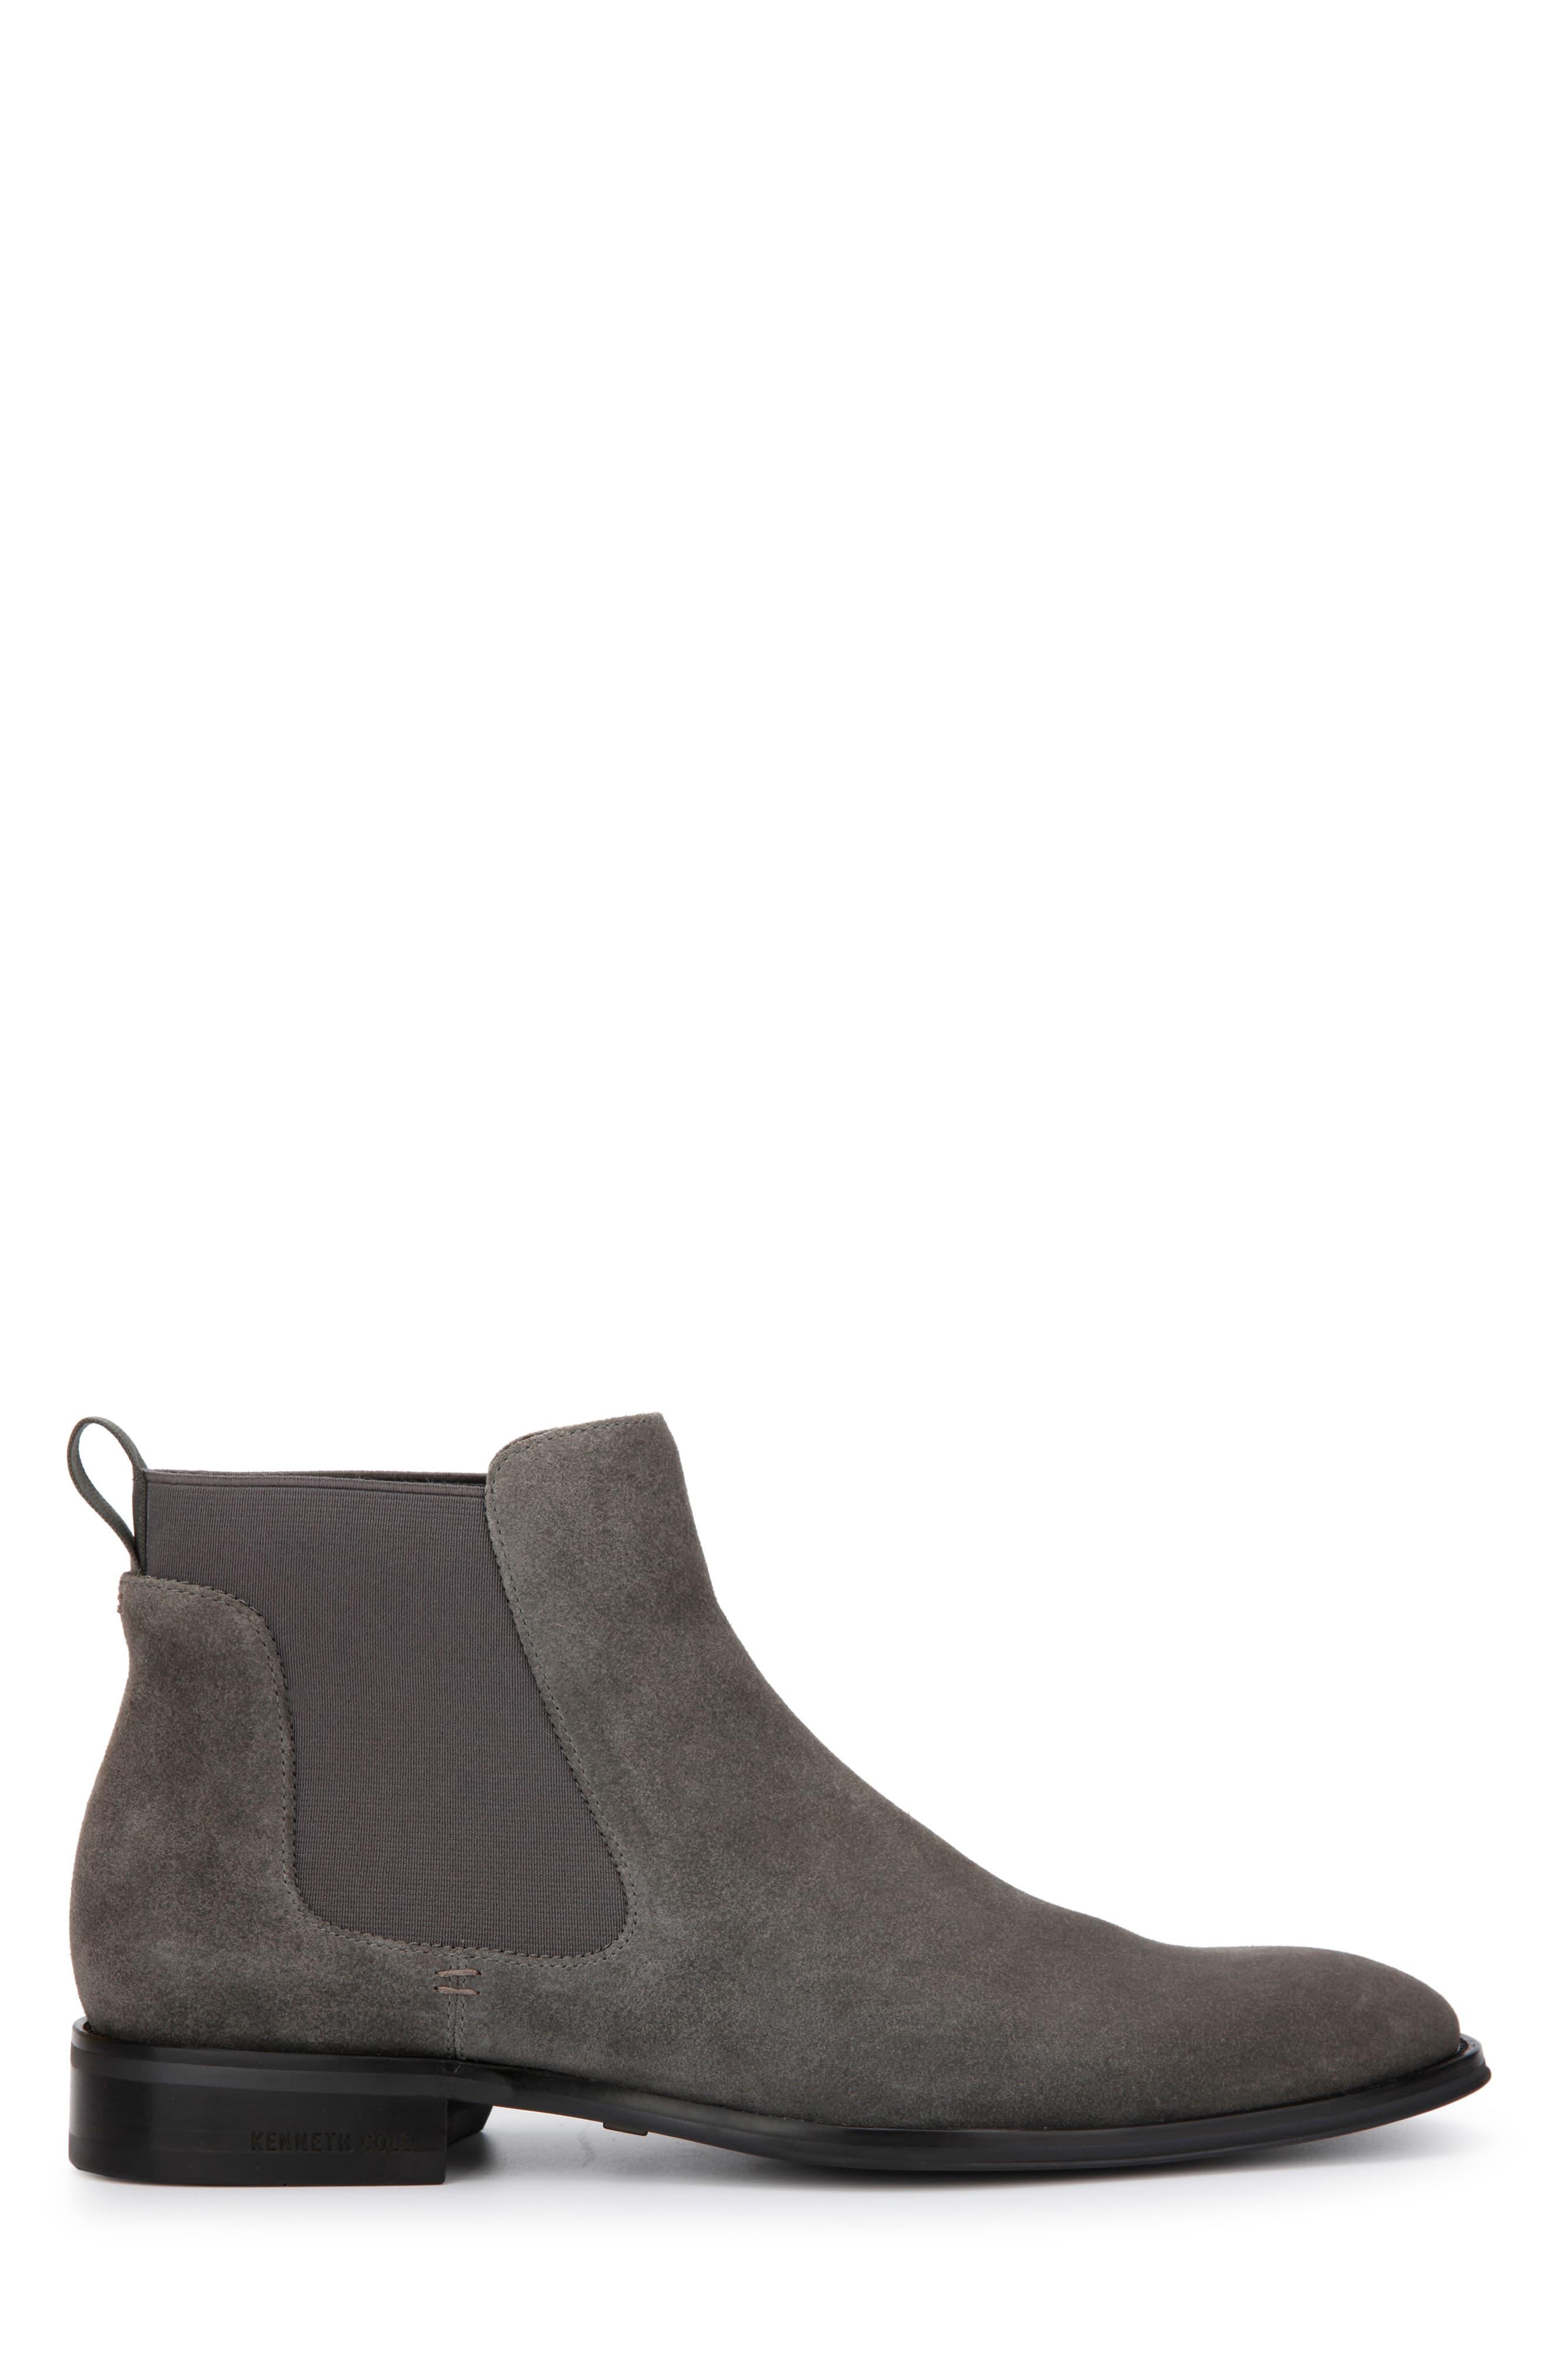 Kenneth Cole Tully Chelsea Boot in Grey (Gray) for Men - Lyst